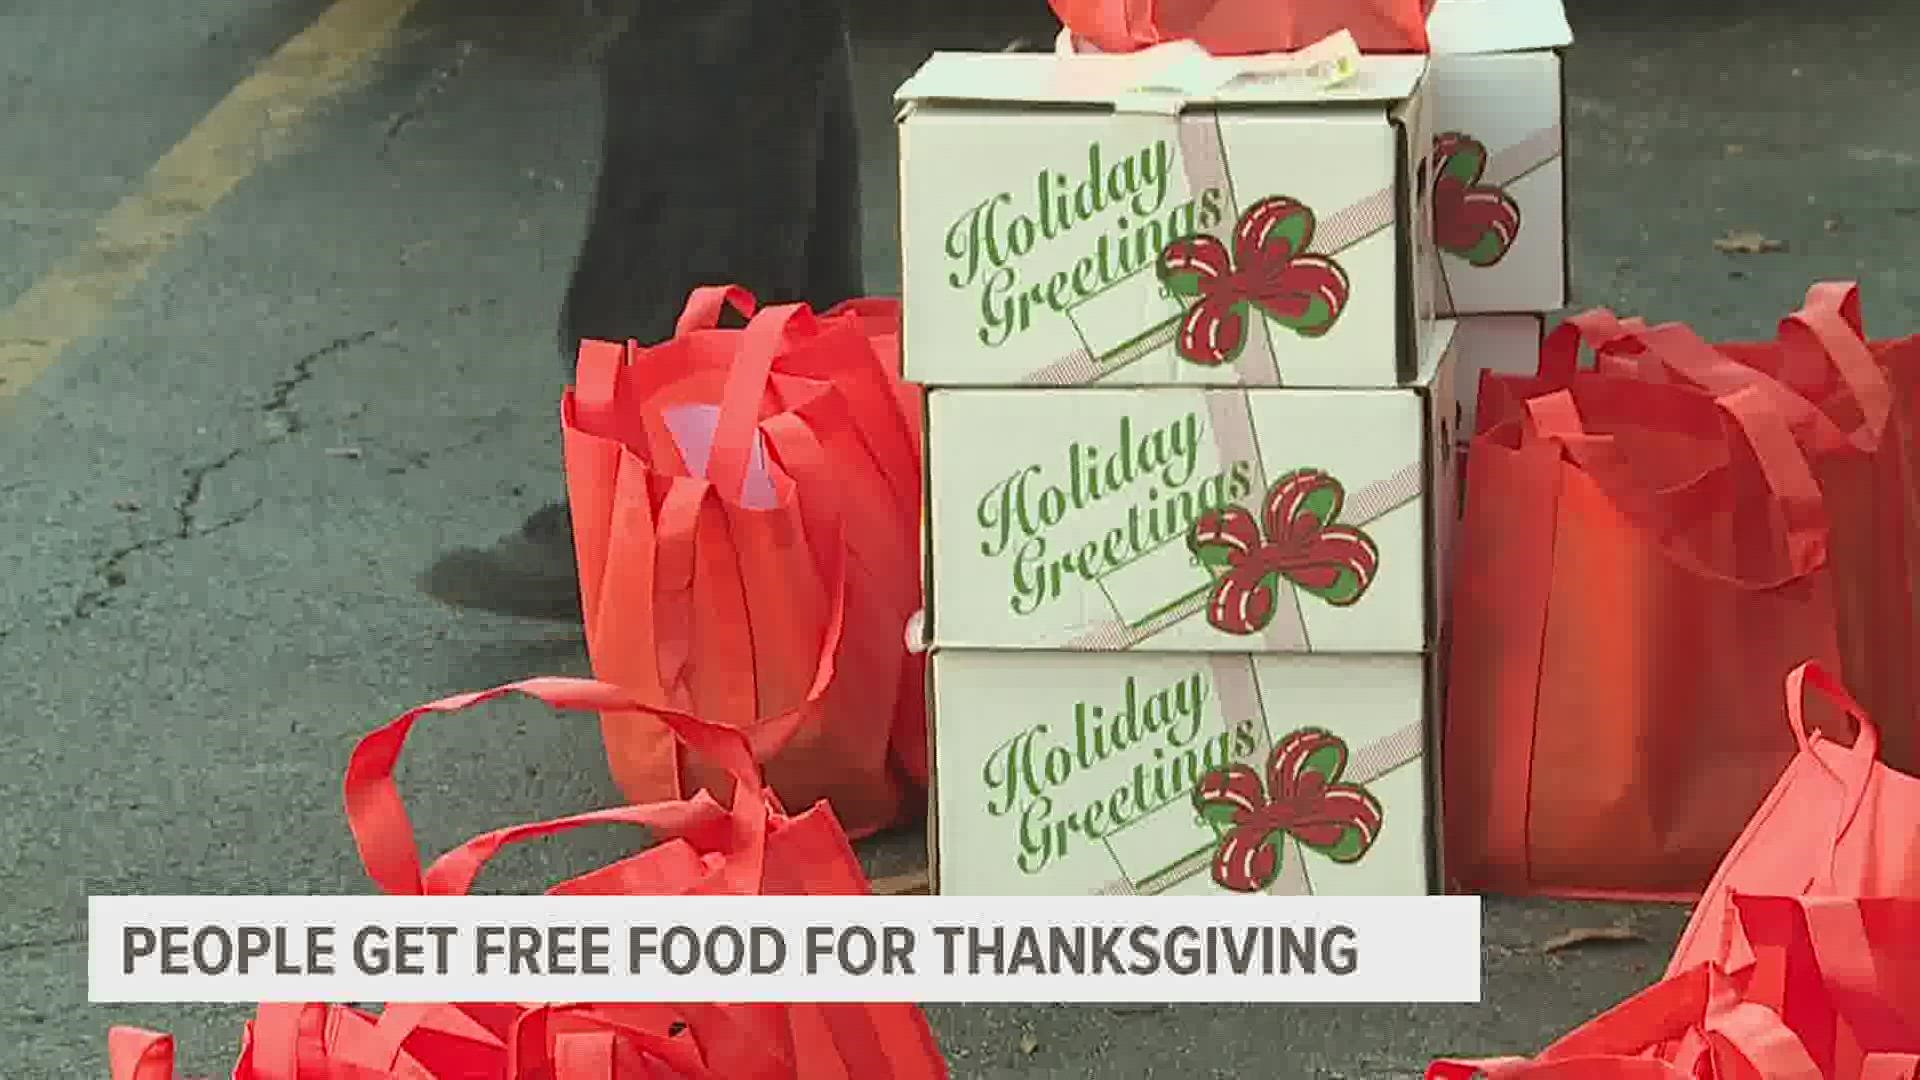 Thanksgiving is just under a week away and in East Moline, Moline, and Rock Island, food was being given away for families in need.